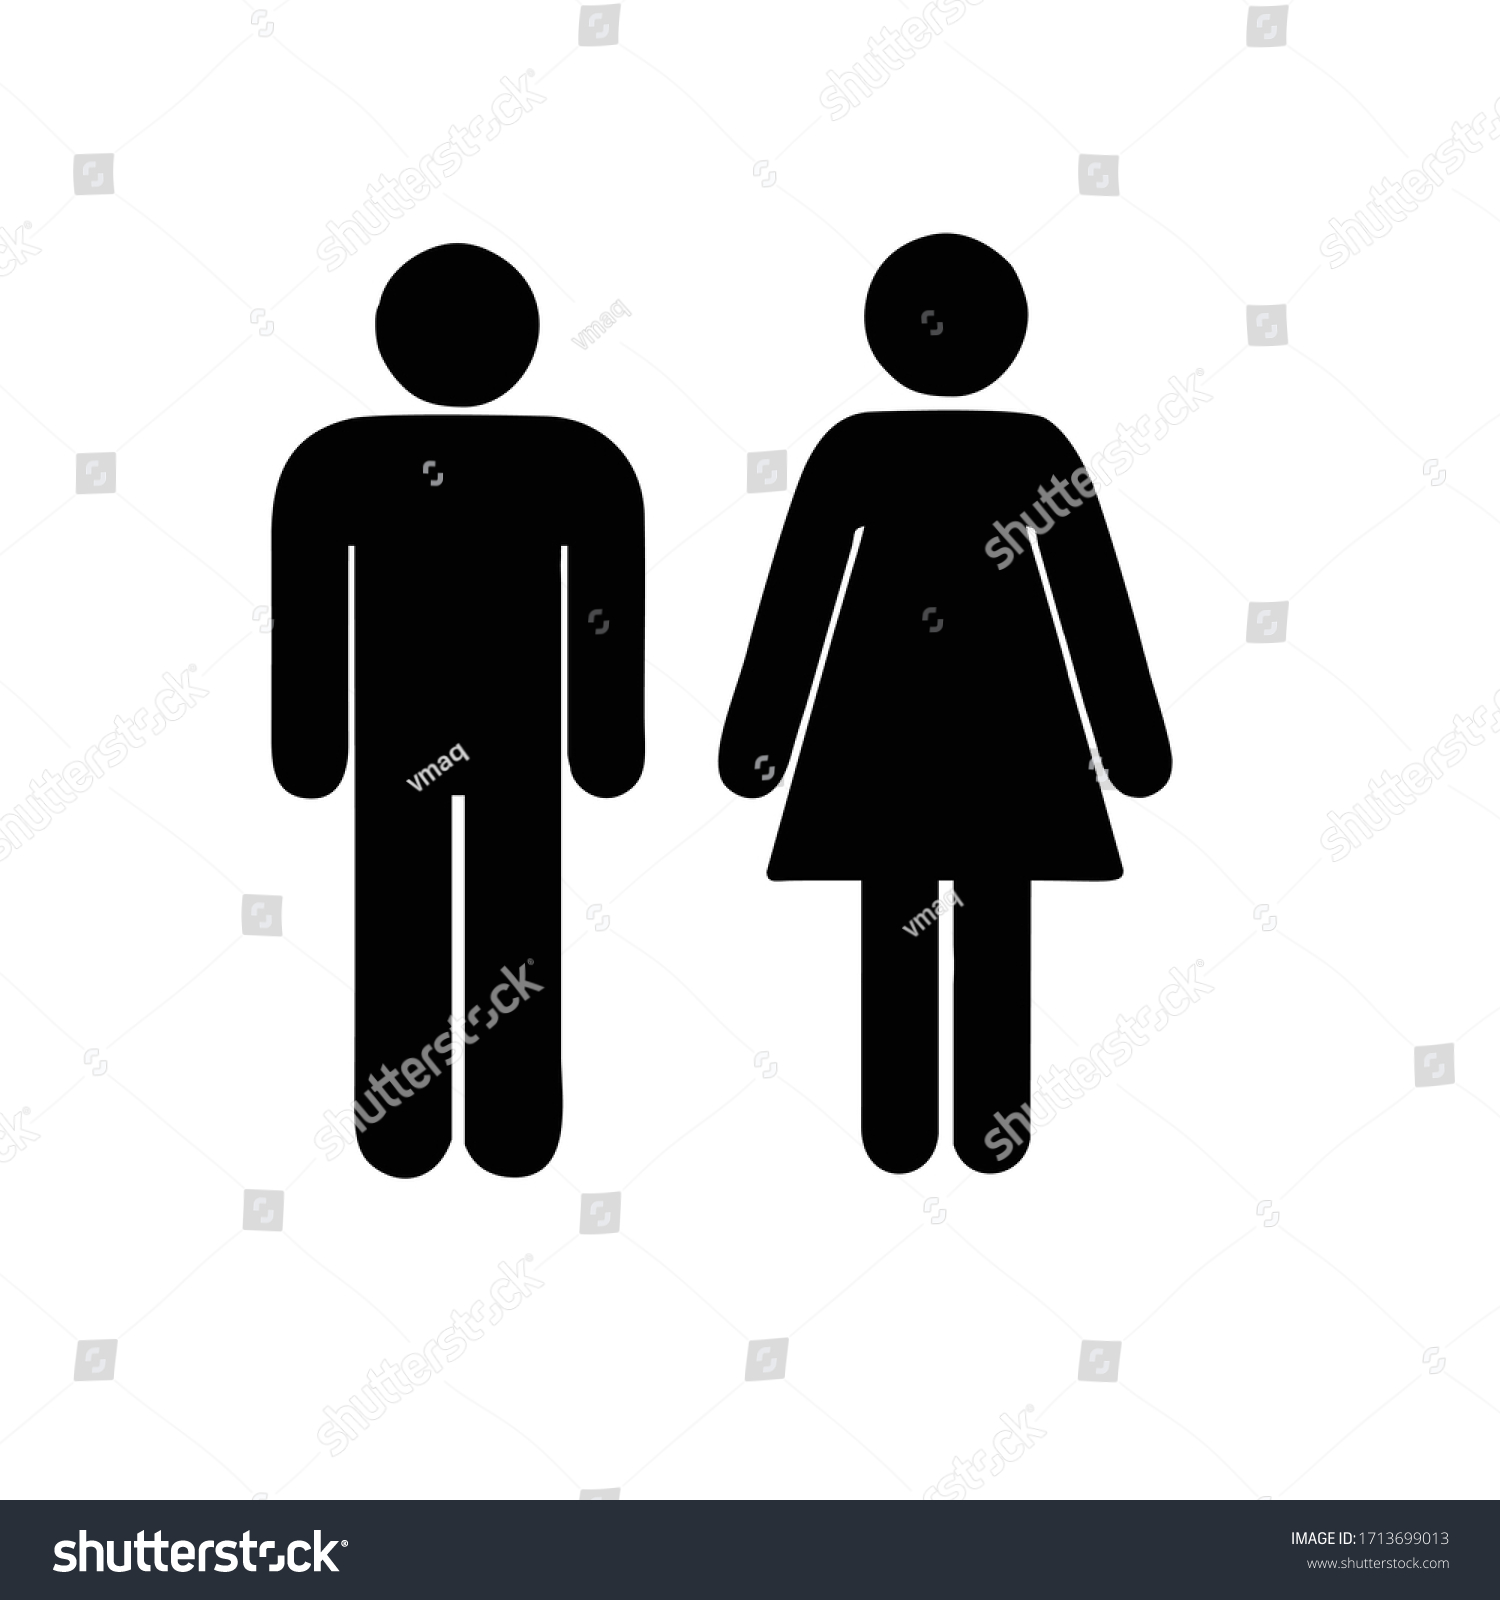 man and woman icon. boy and girl icon or badge #1713699013